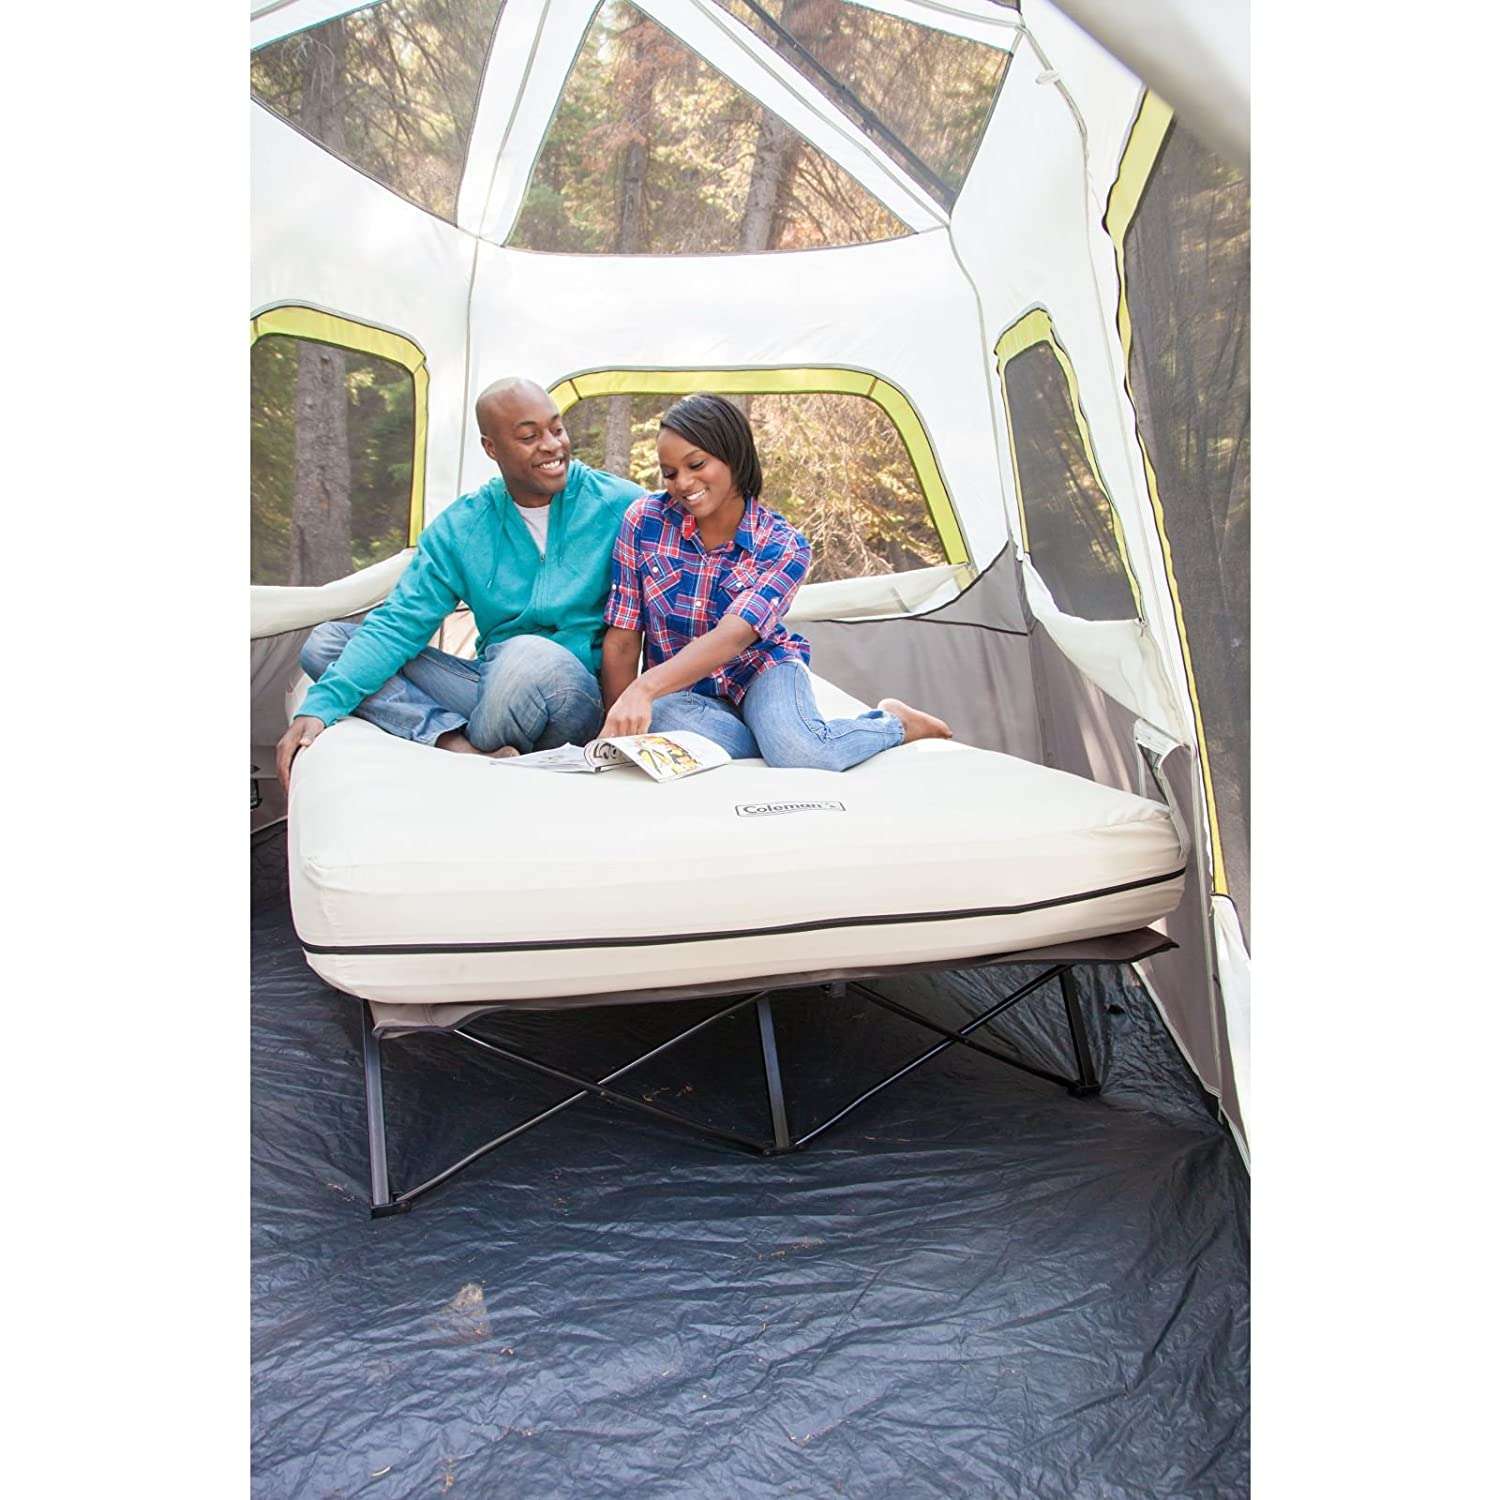 What Are The Best Camping Beds For Heavy People?